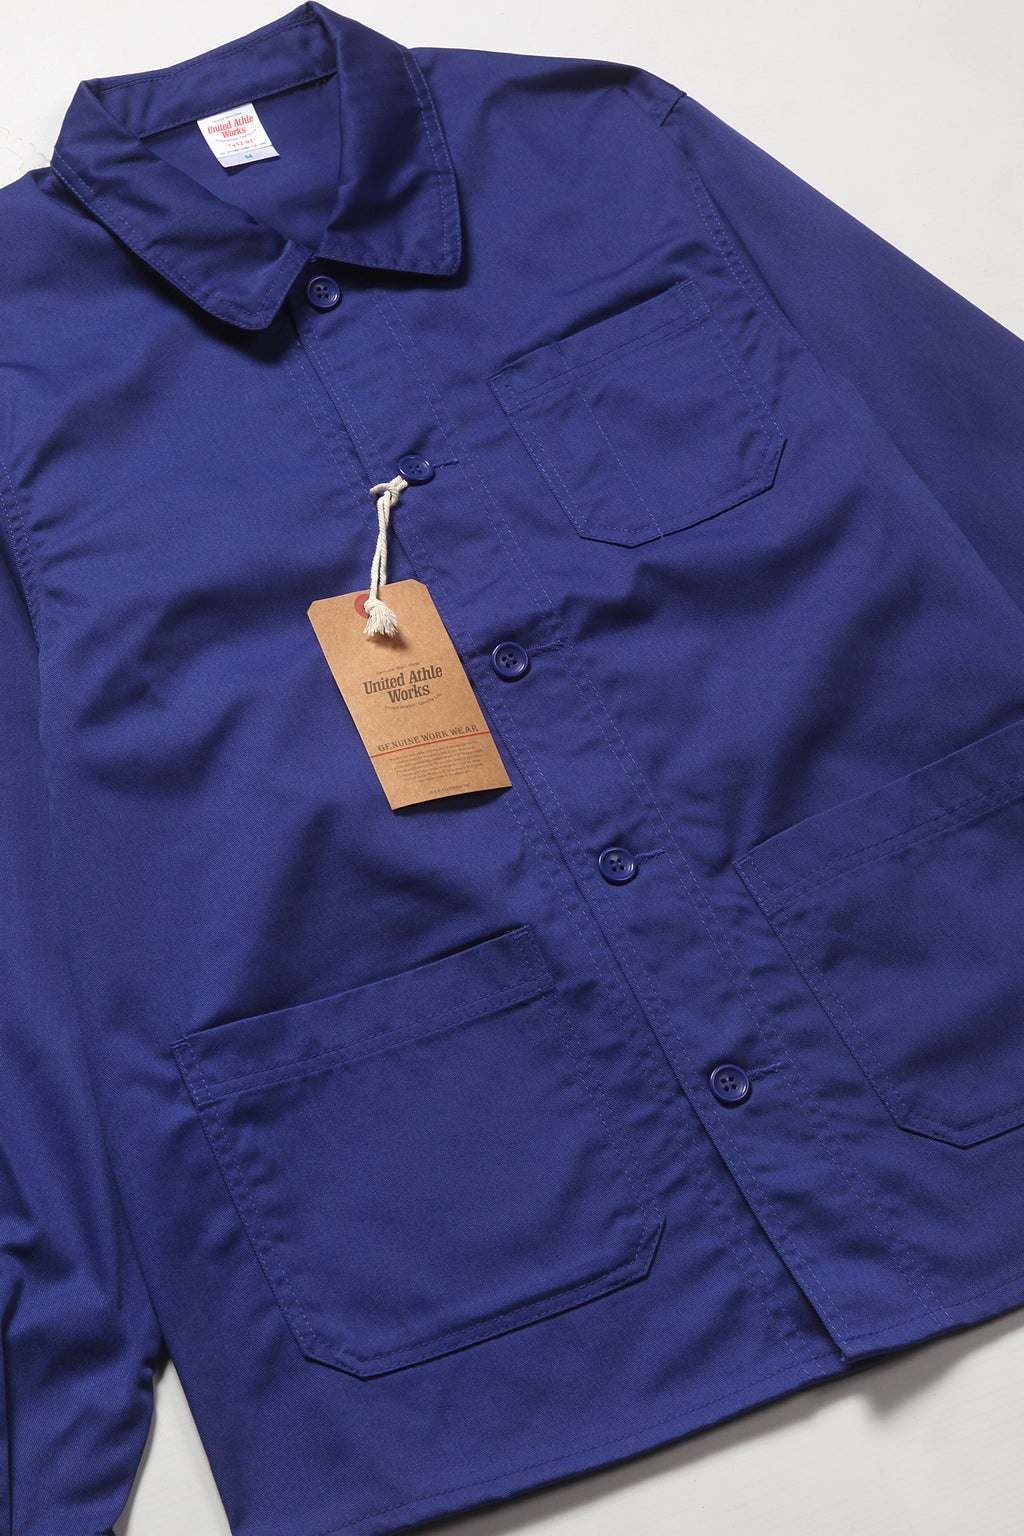 United Athle Works - 7452 Coverall Jacket - Work Blue